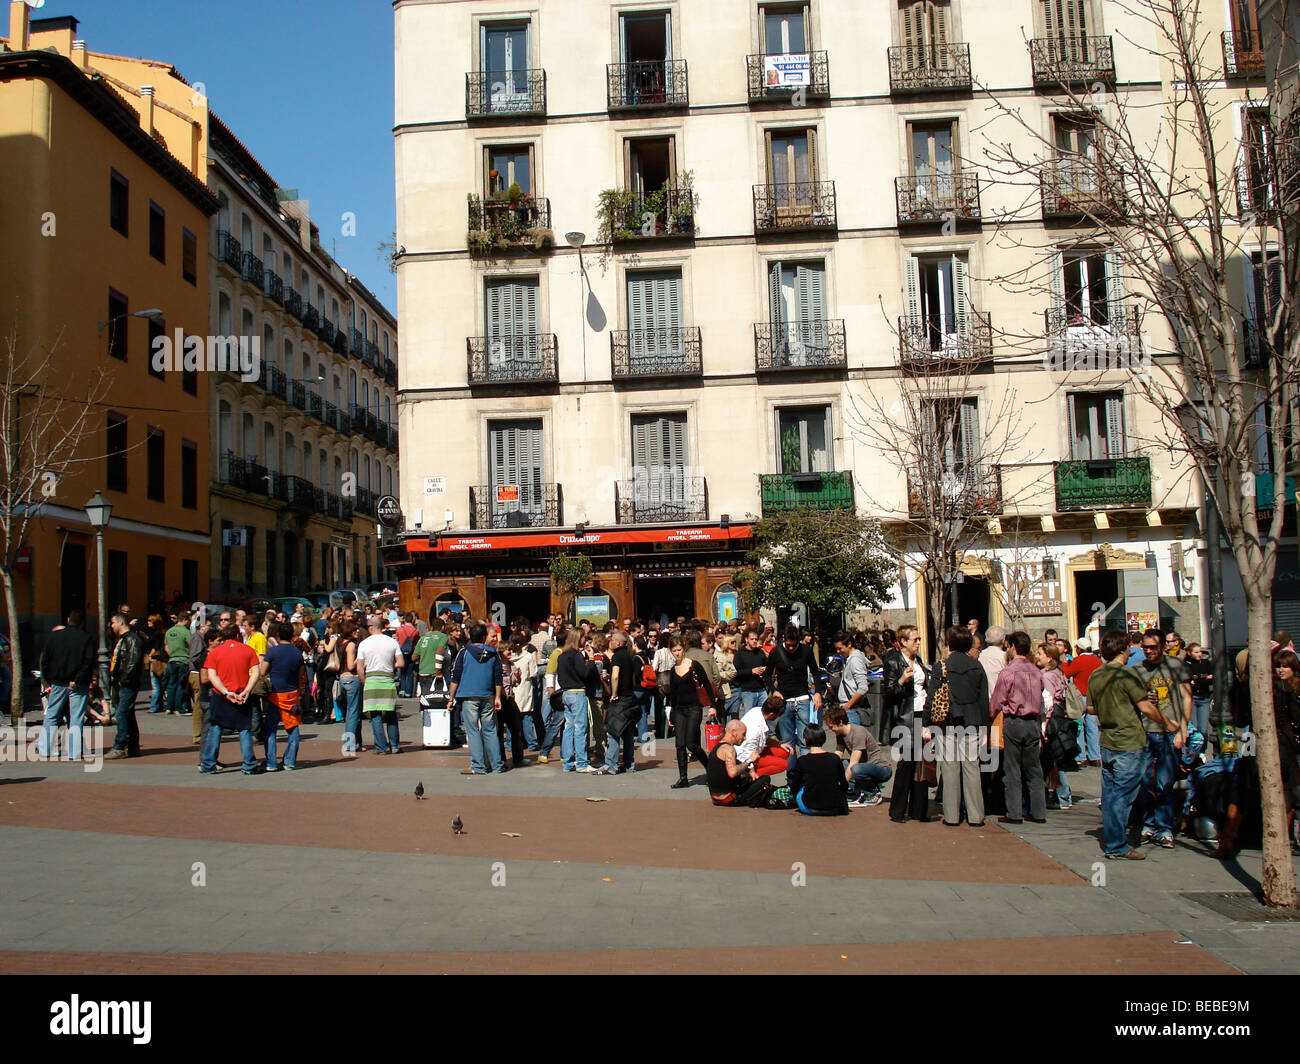 A young affluent crowd drink in the afternoon sun, in Chueca the gay district of Madrid. Plaza de Chueca, Madrid, Spain. Stock Photo